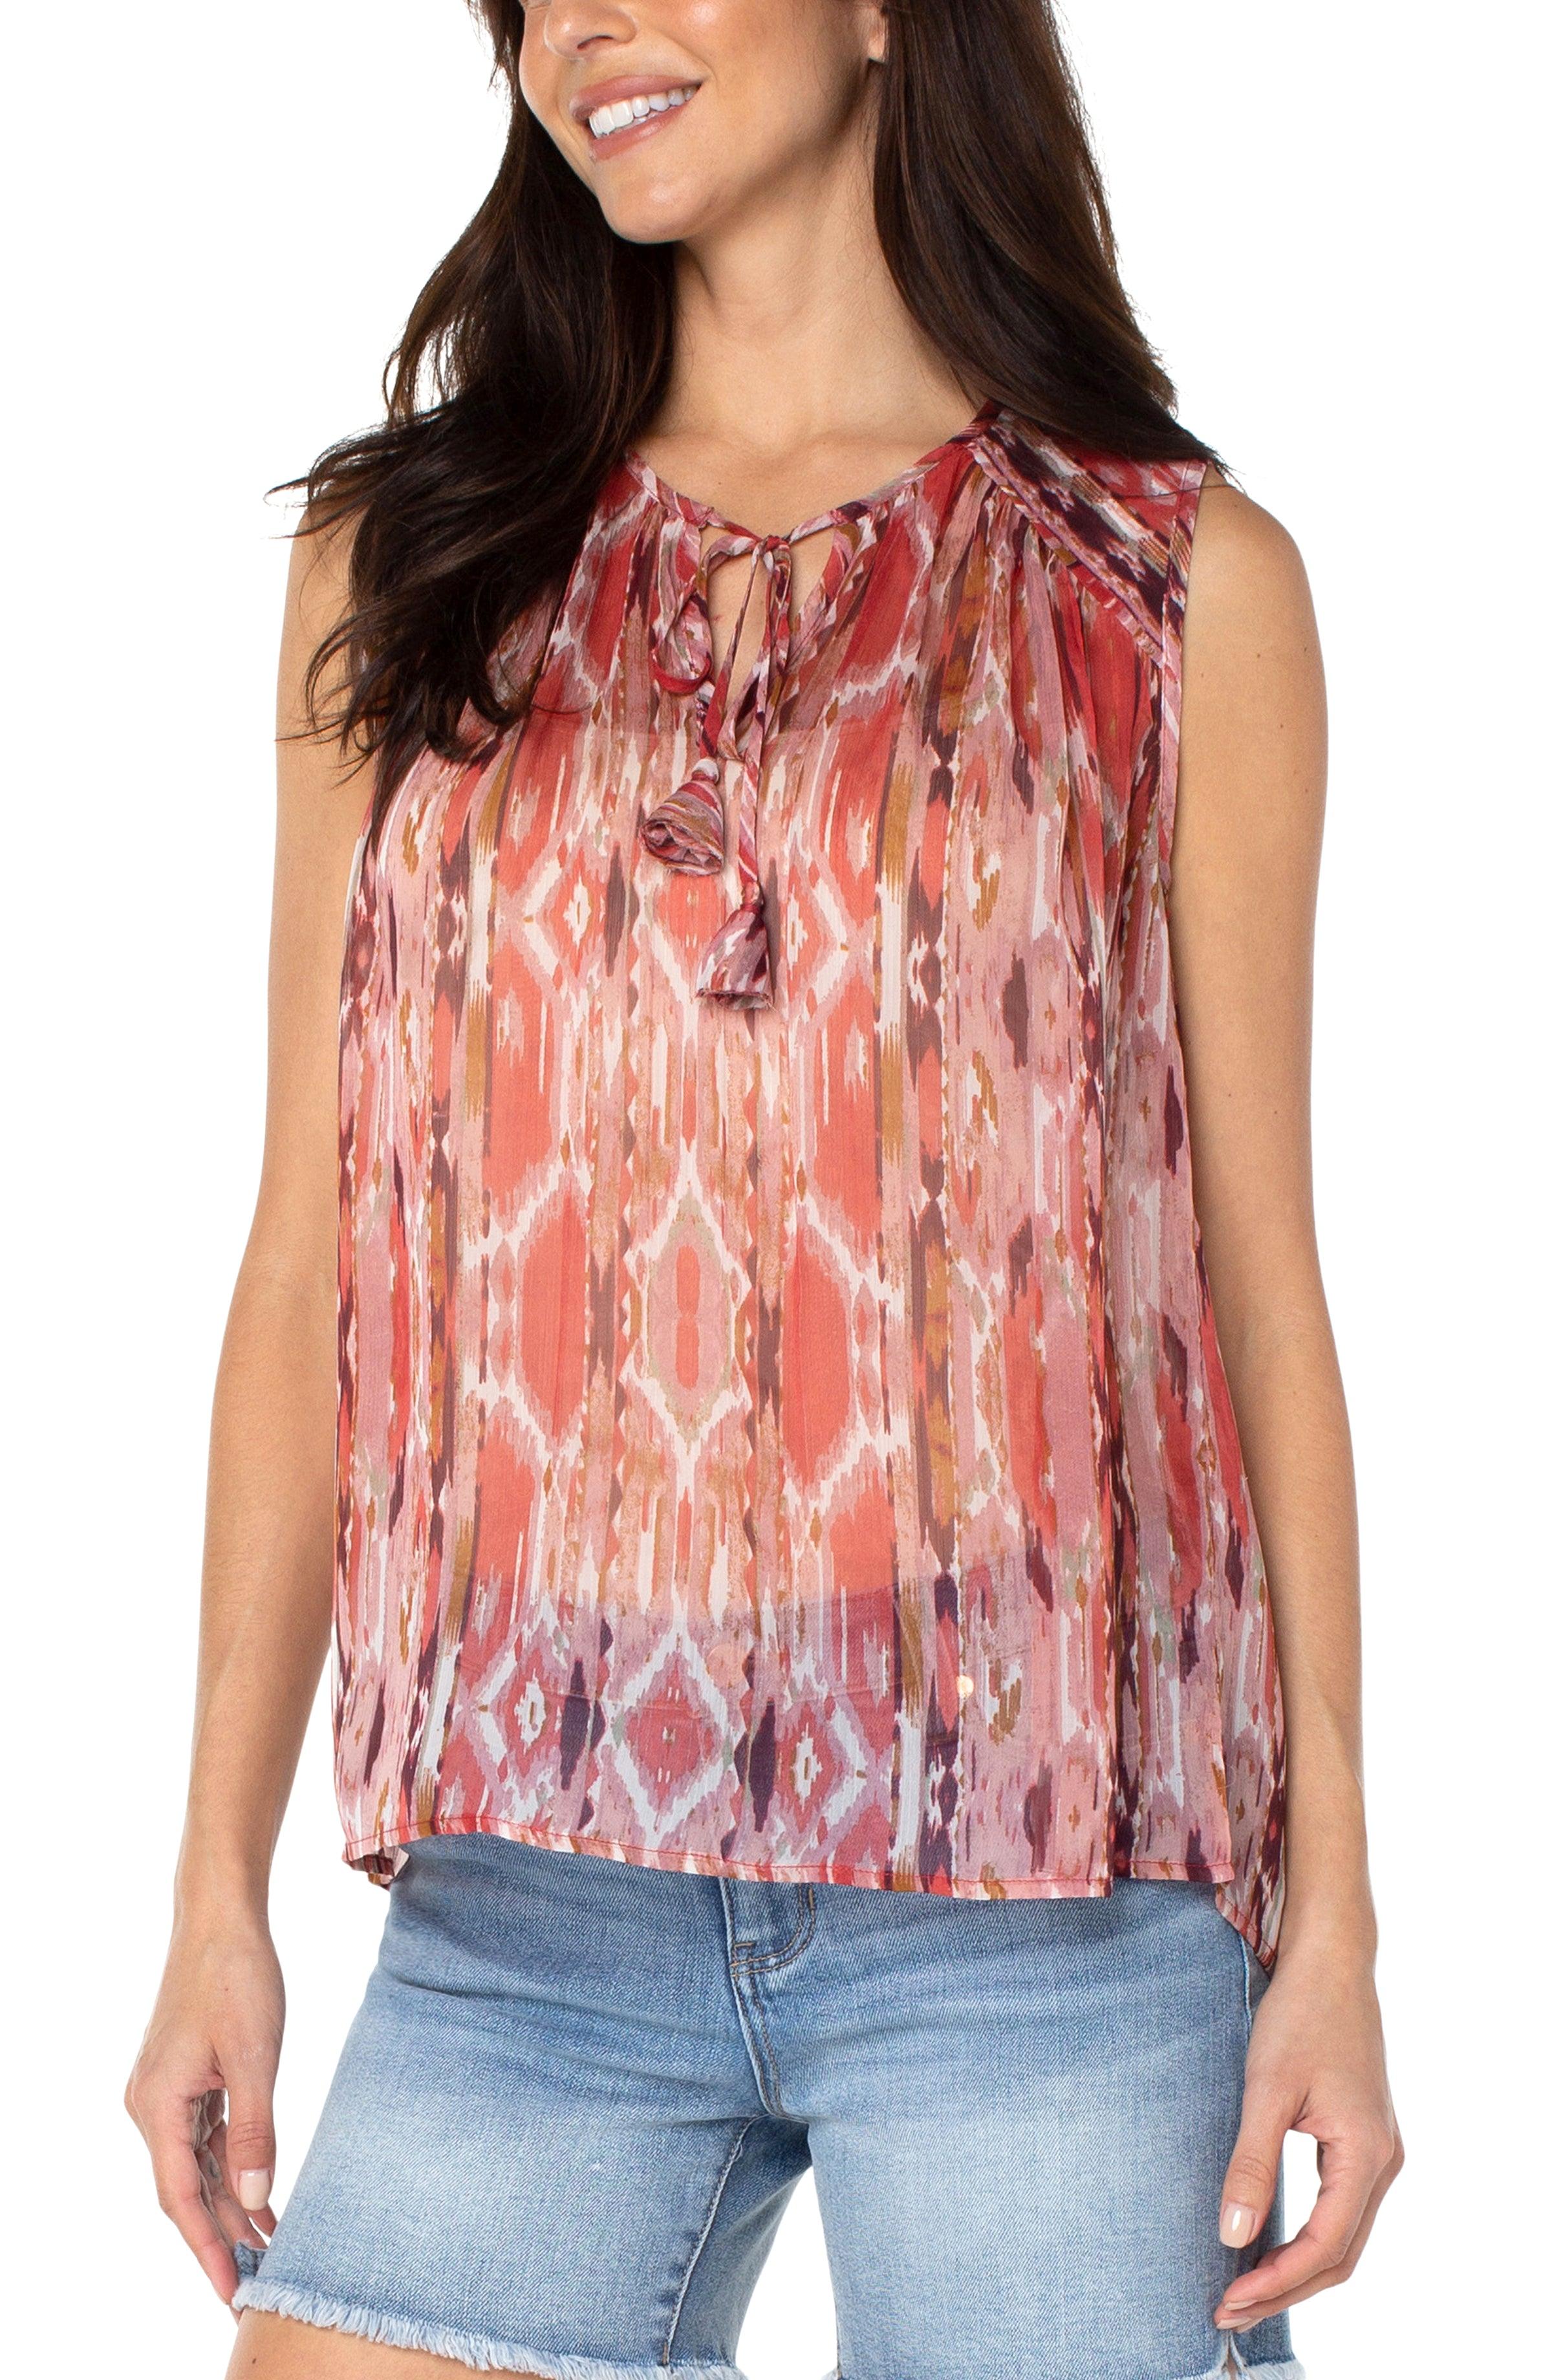  lightweight ikat print to go with the desert blossom collection. This sleeveless top has front tie and shirring with details at the shoulder.  Liverpool